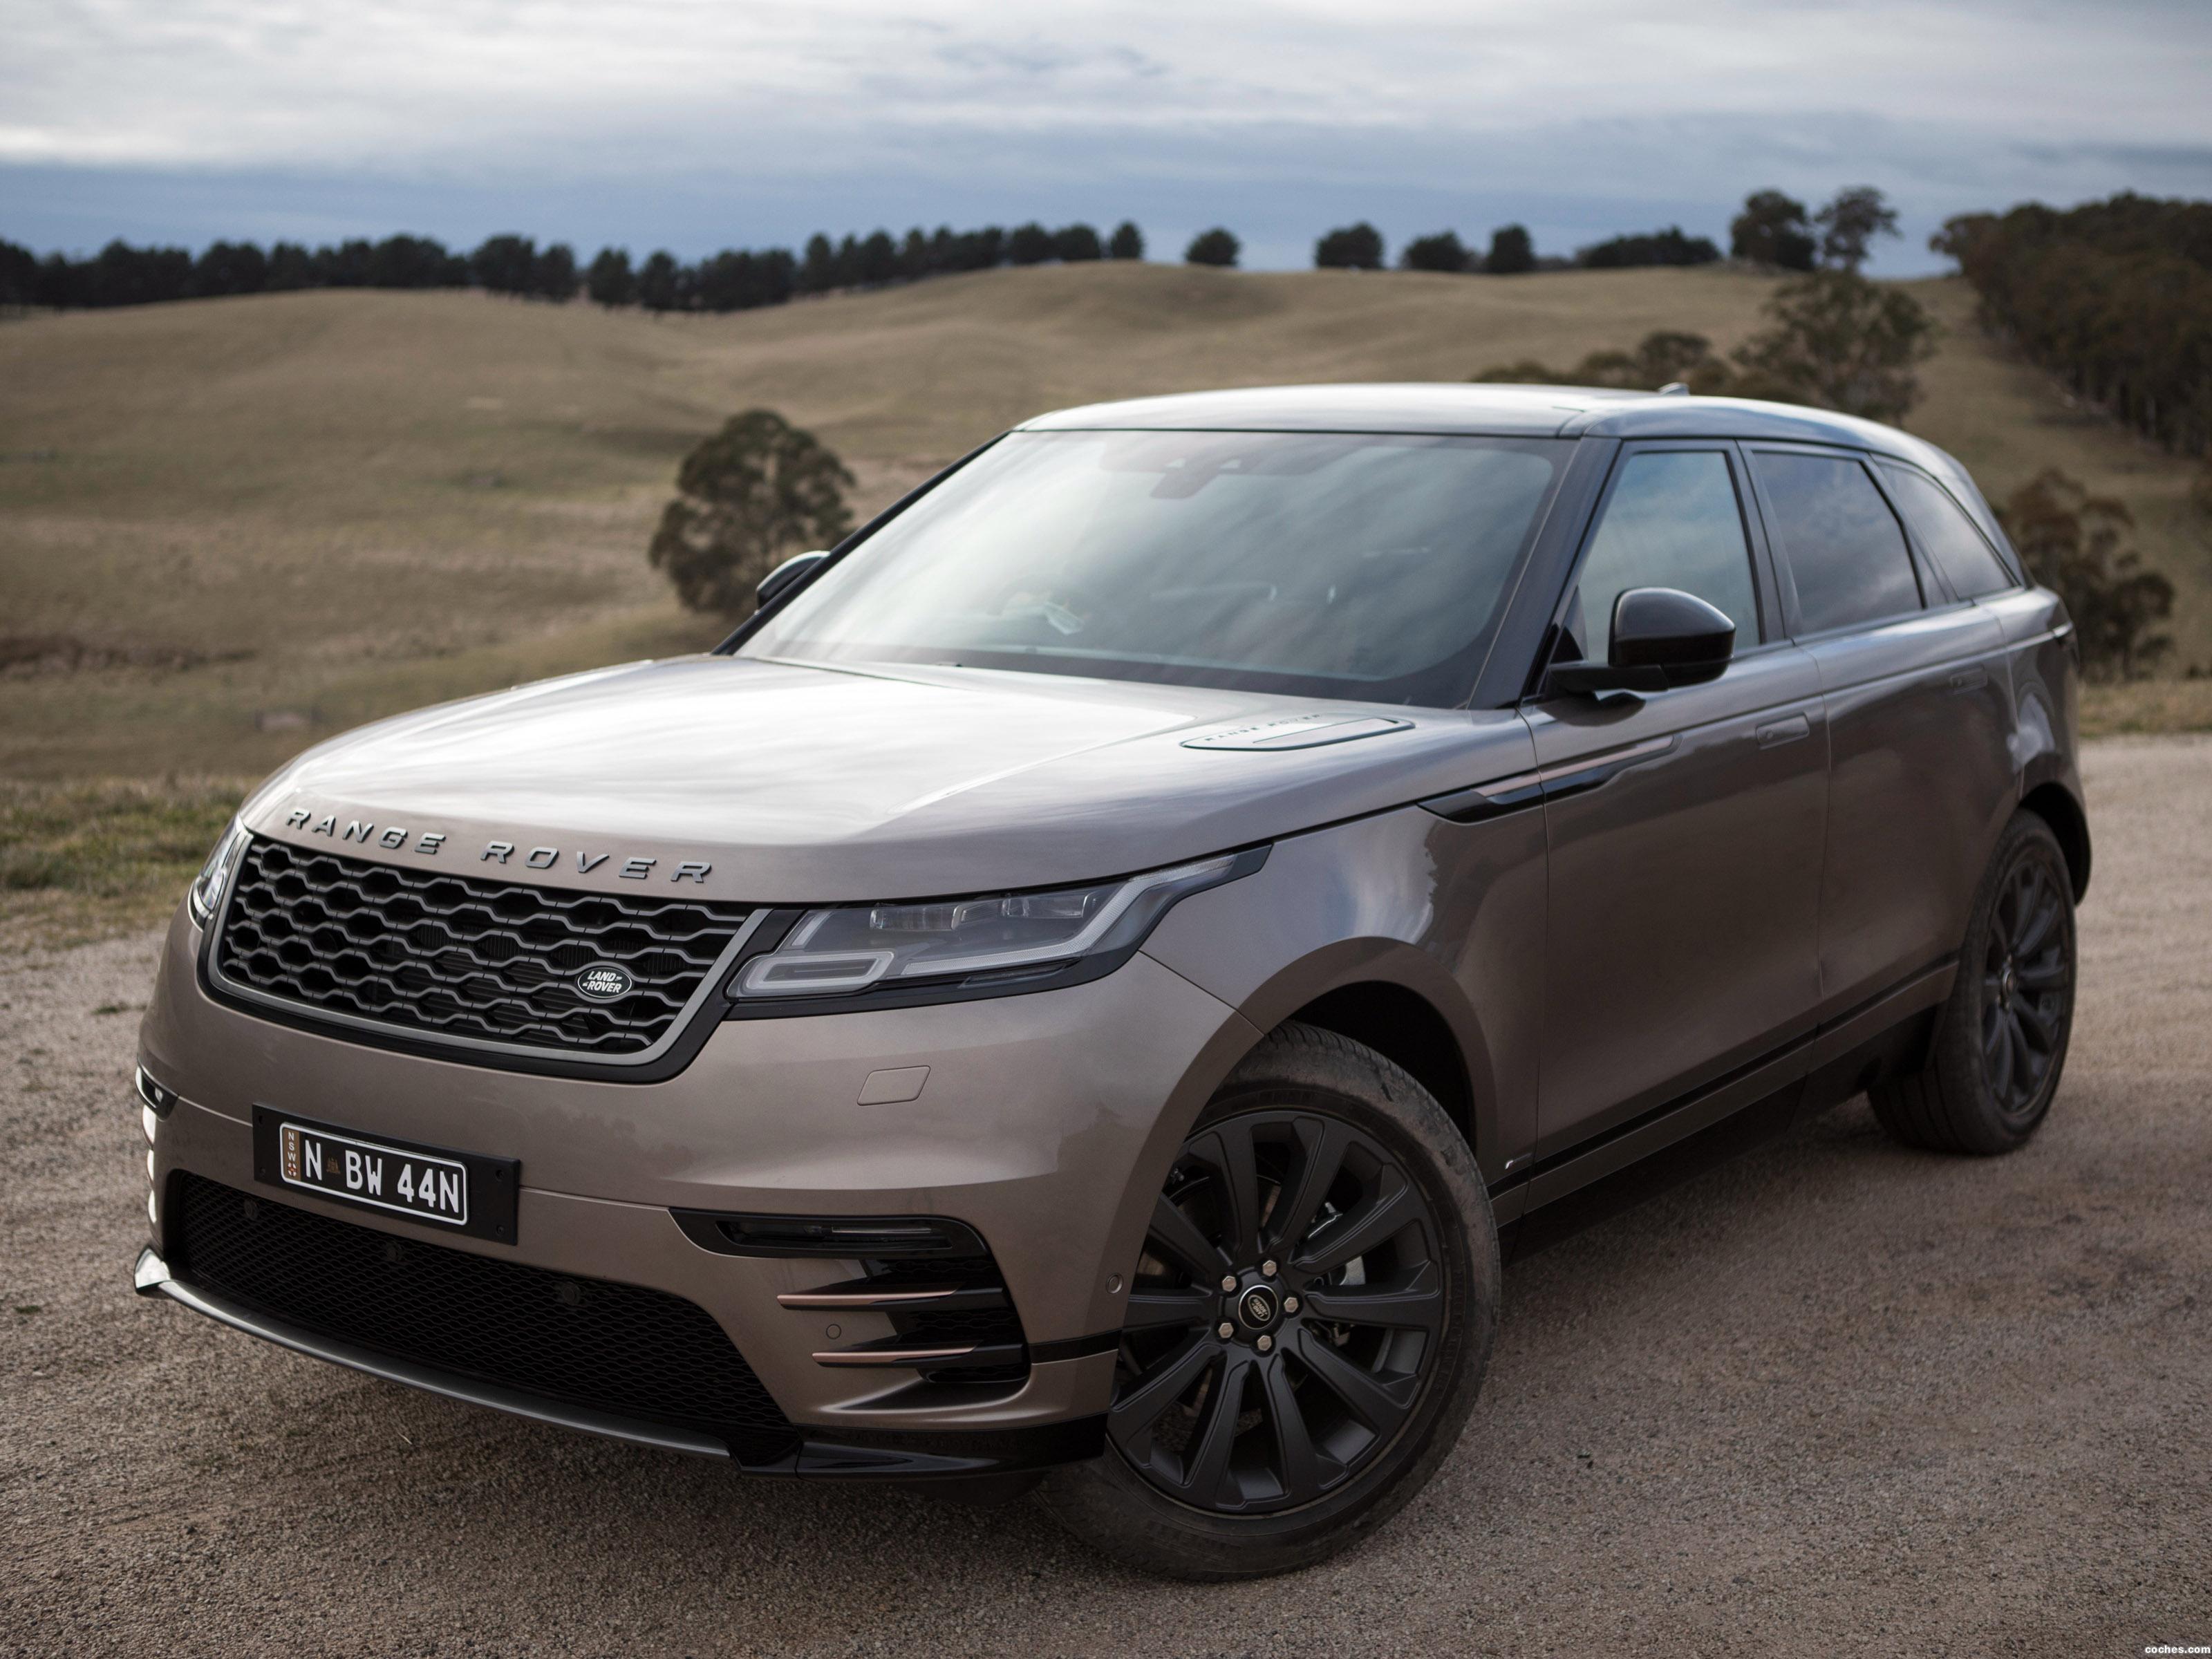 Land Rover Range Rover Velar accessories specifications